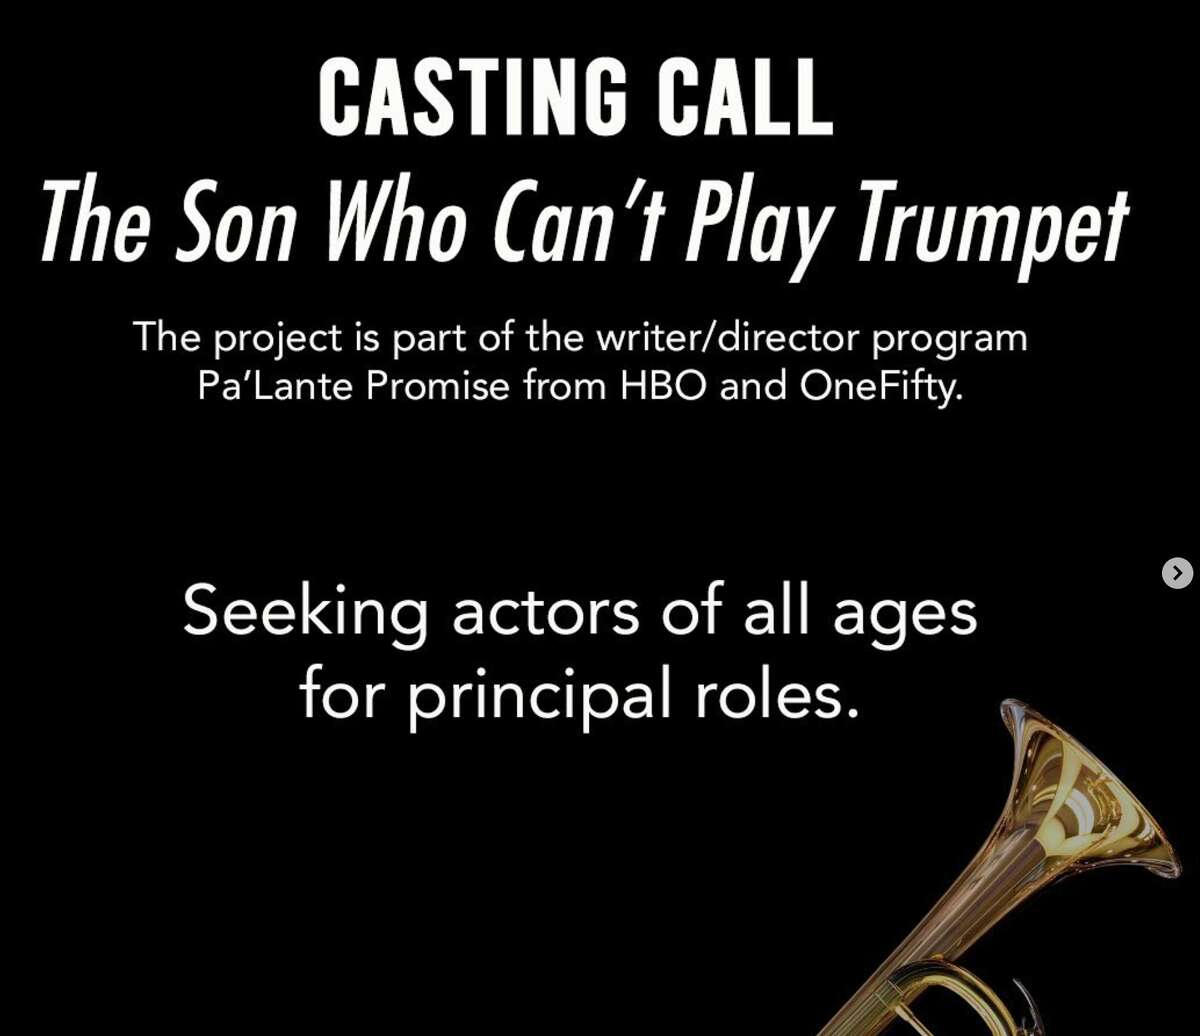 Locally-produced film "The Son Who Can't Play Trumpet" has opened a casting call, looking for actors to fill principal roles in the film. 